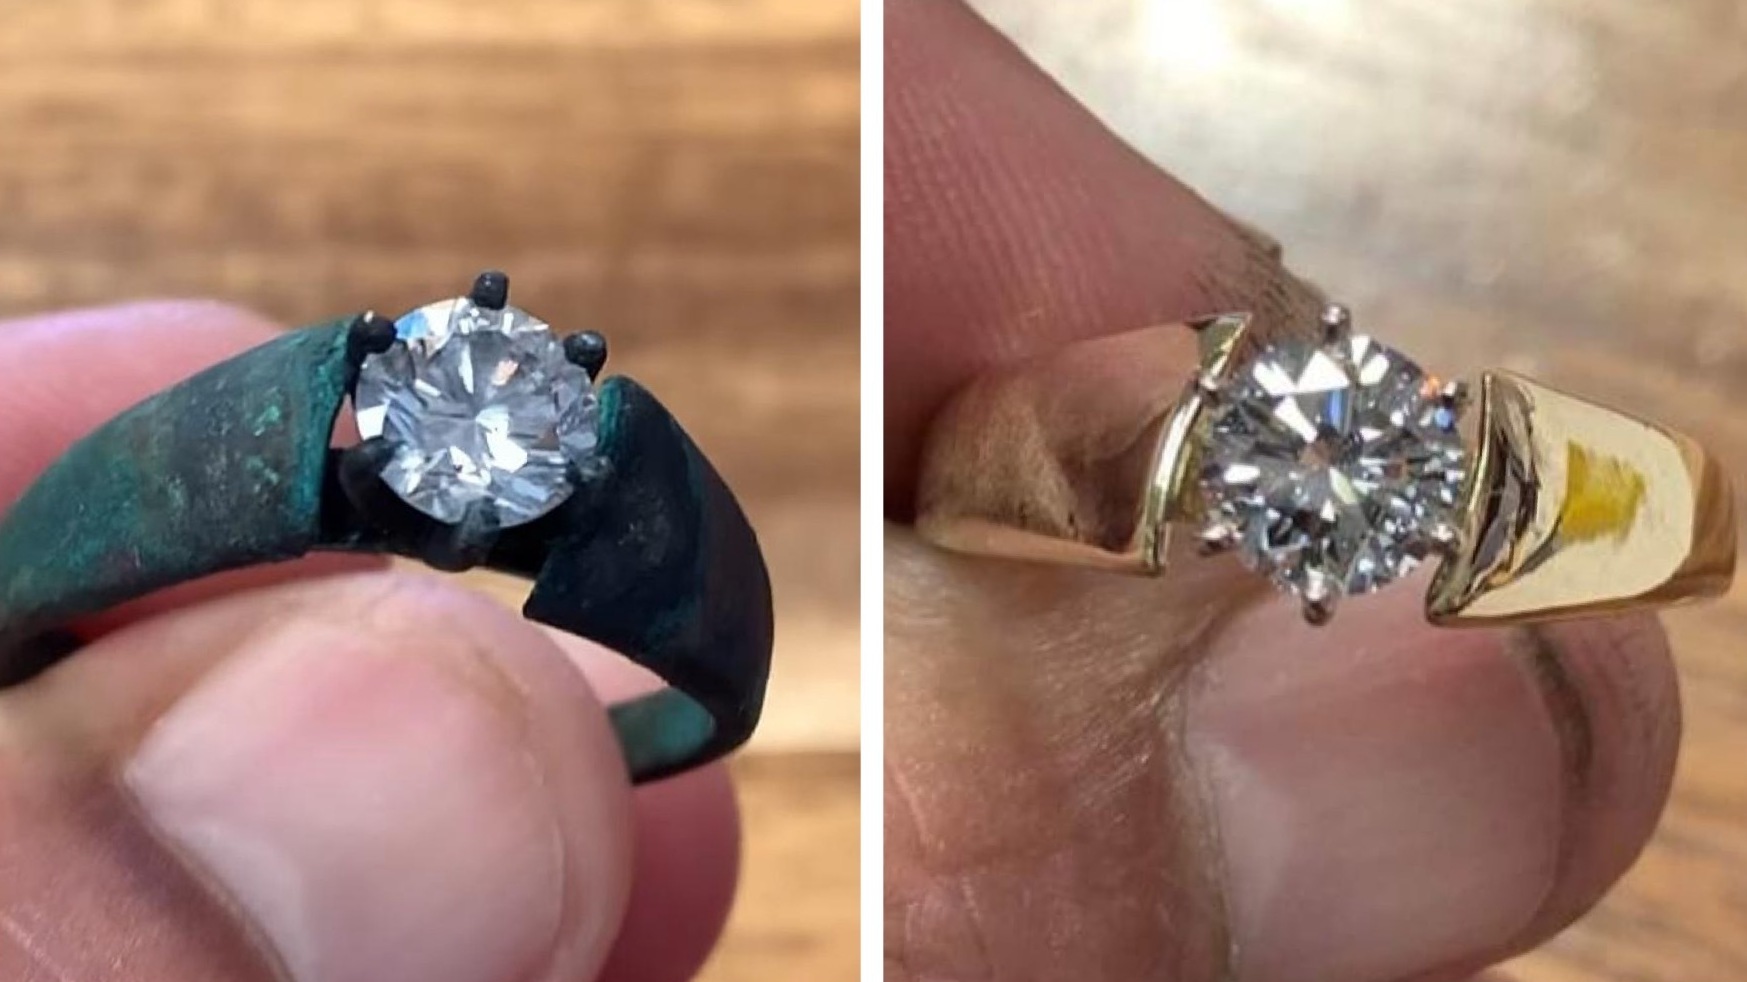 Maui wildfires ruined personal treasures. A local jeweler is repairing items for free